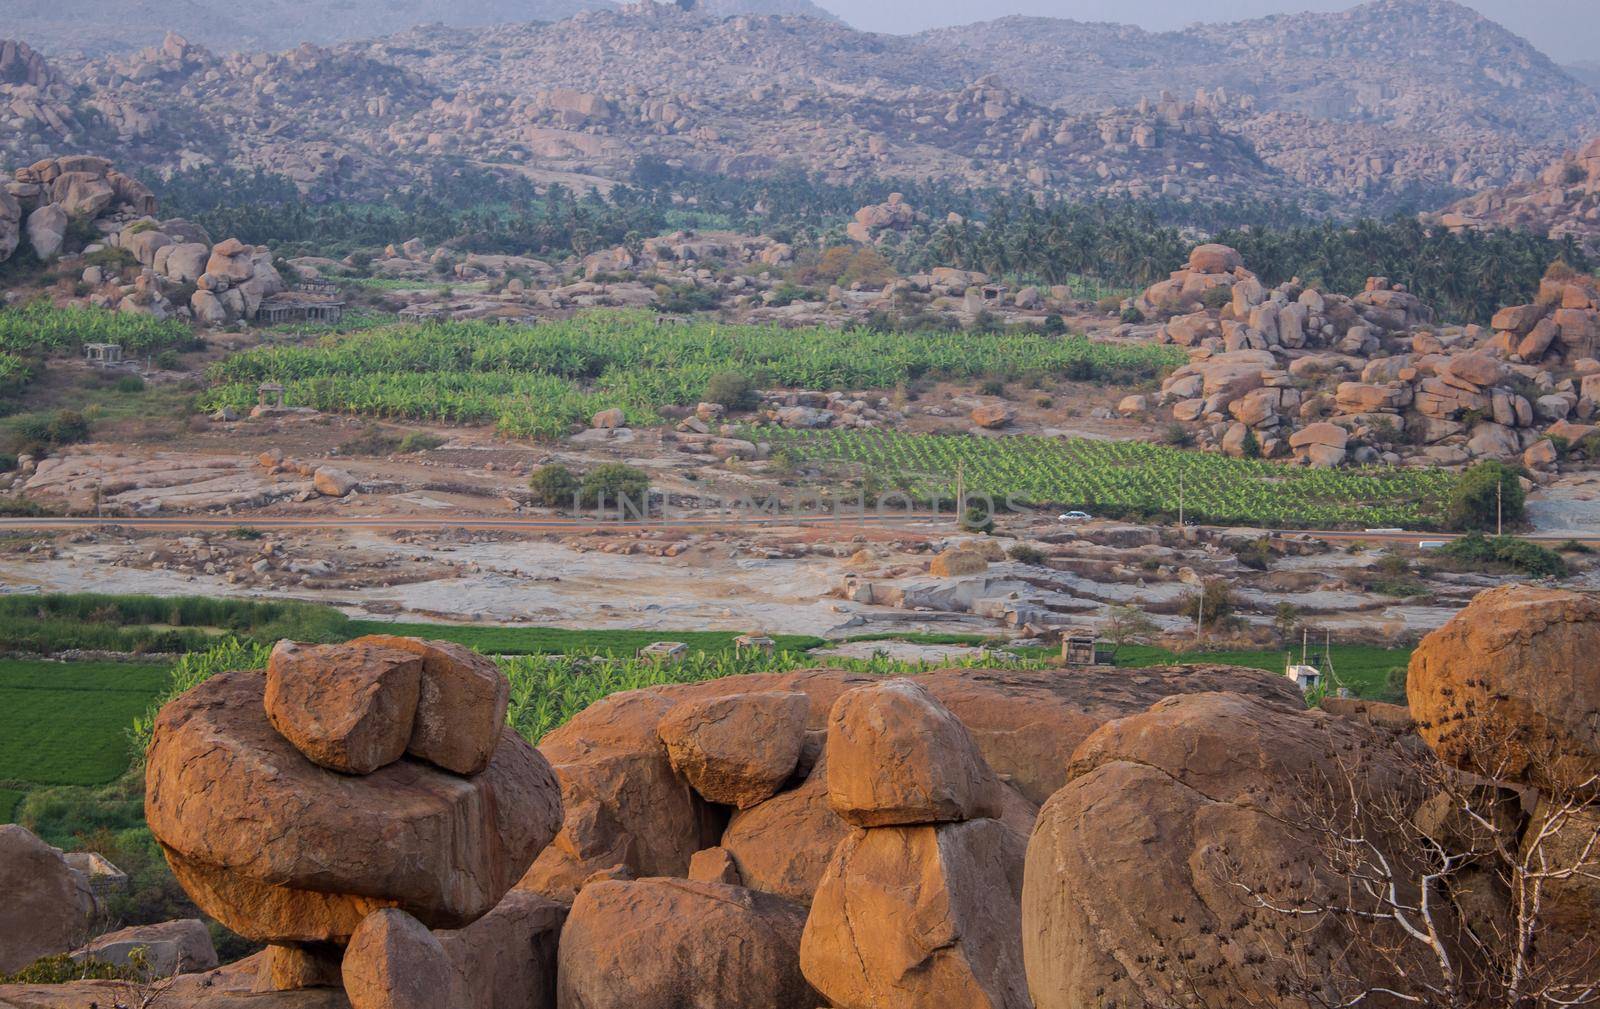 Mountain landscape at Hampi by snep_photo